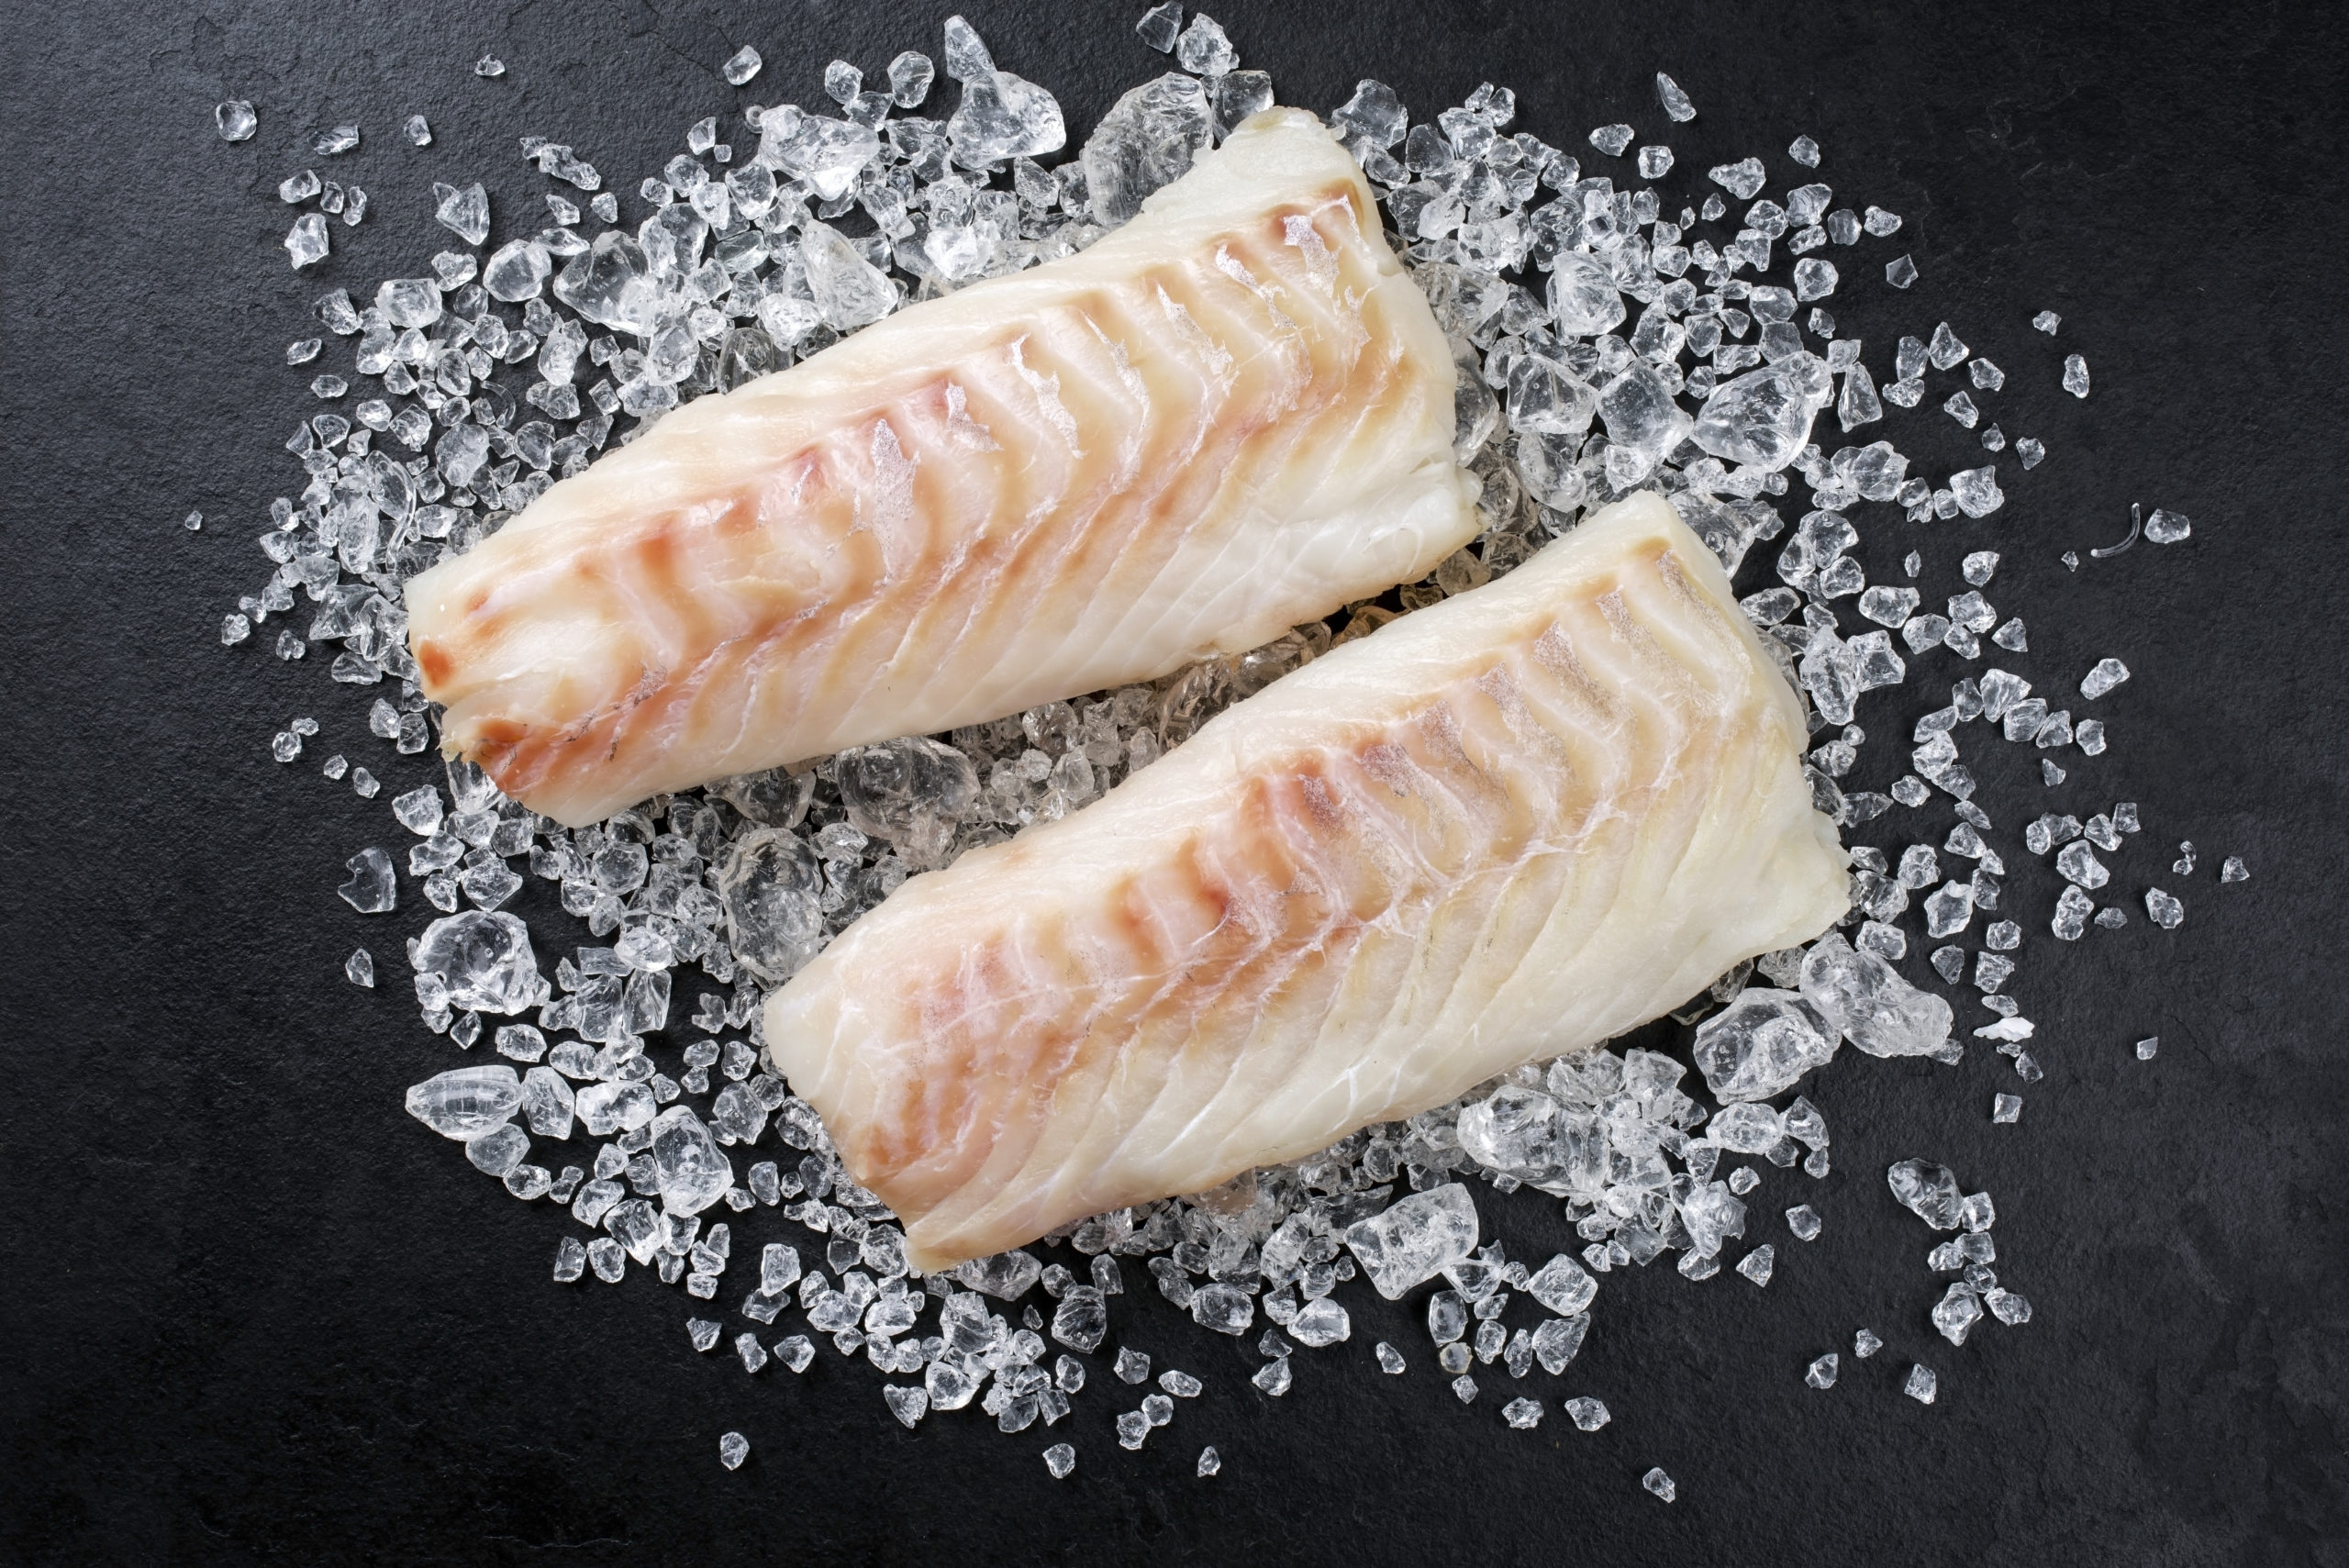 Raw Norwegian skrei cod fish filet as top view on crashed ice on